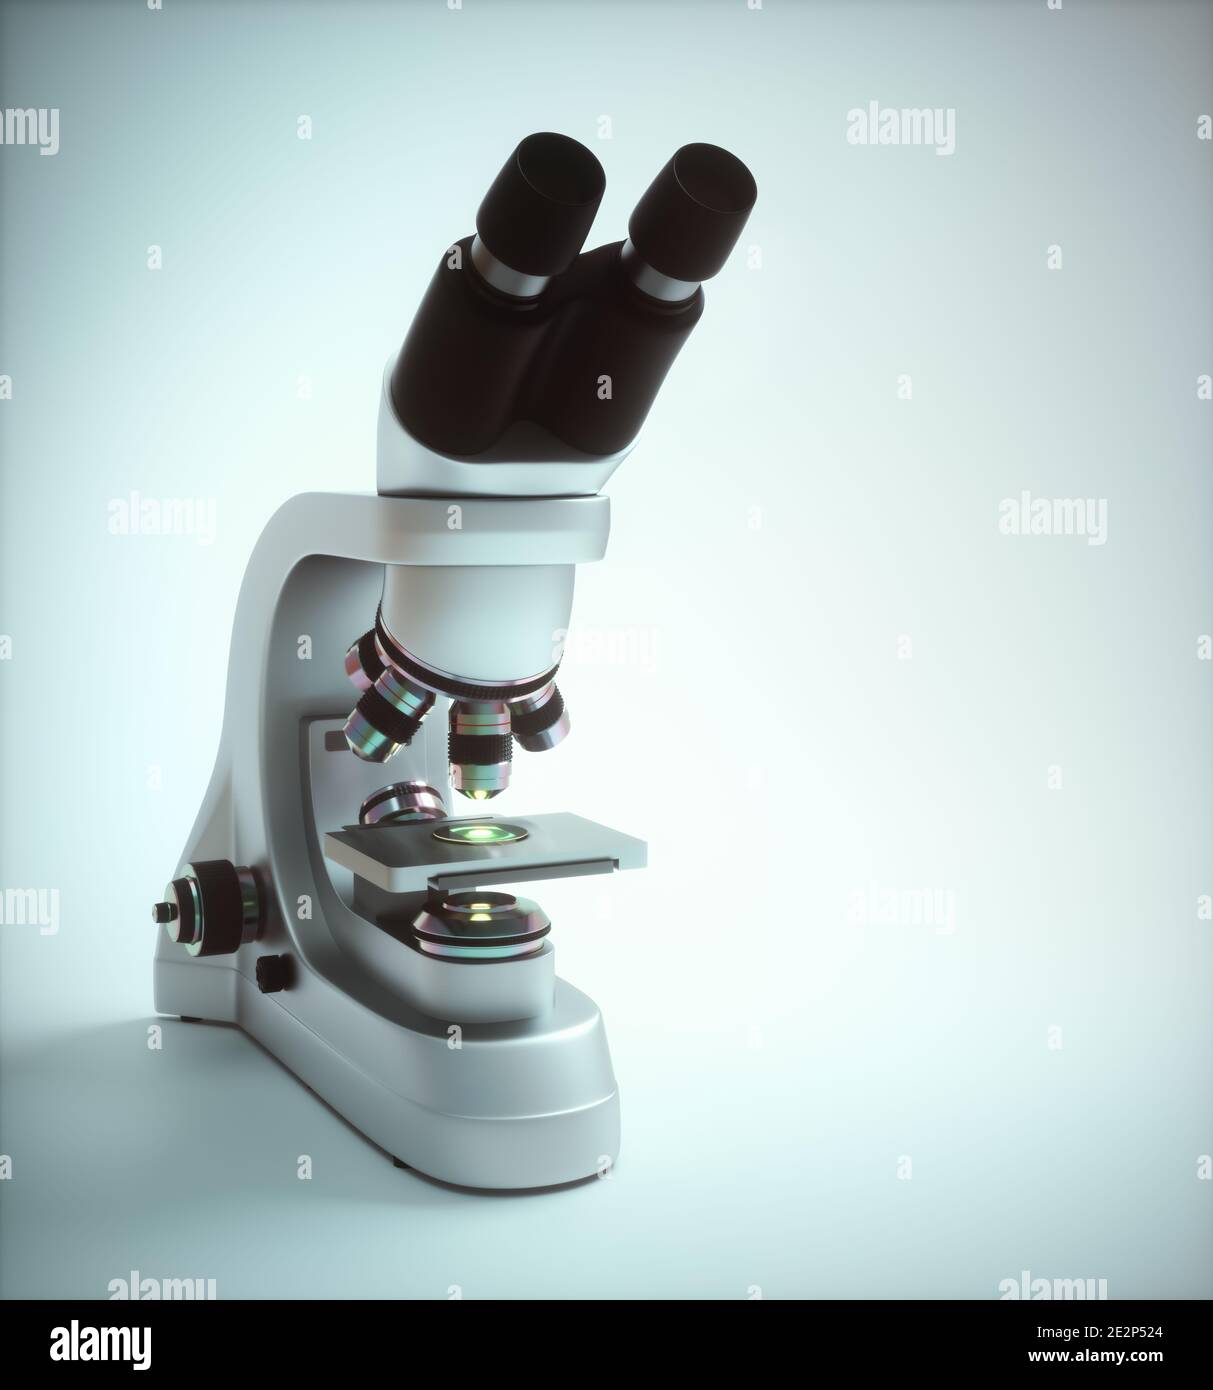 Optical electron microscope. Laboratory instrument with clipping path included. Stock Photo